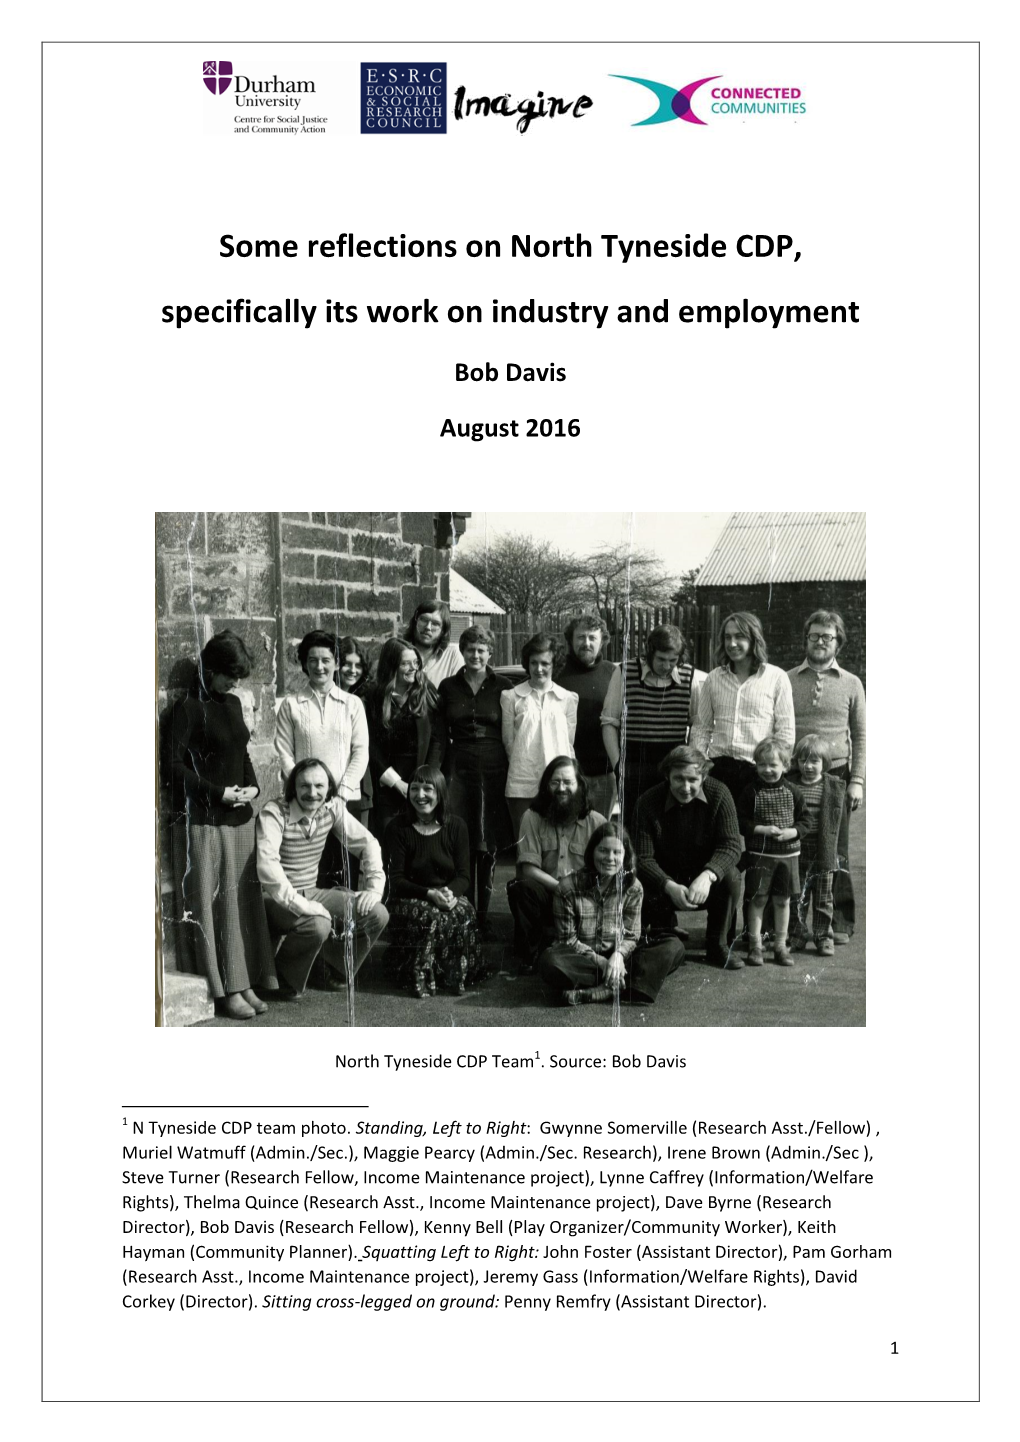 Some Reflections on North Tyneside CDP, Specifically Its Work on Industry and Employment